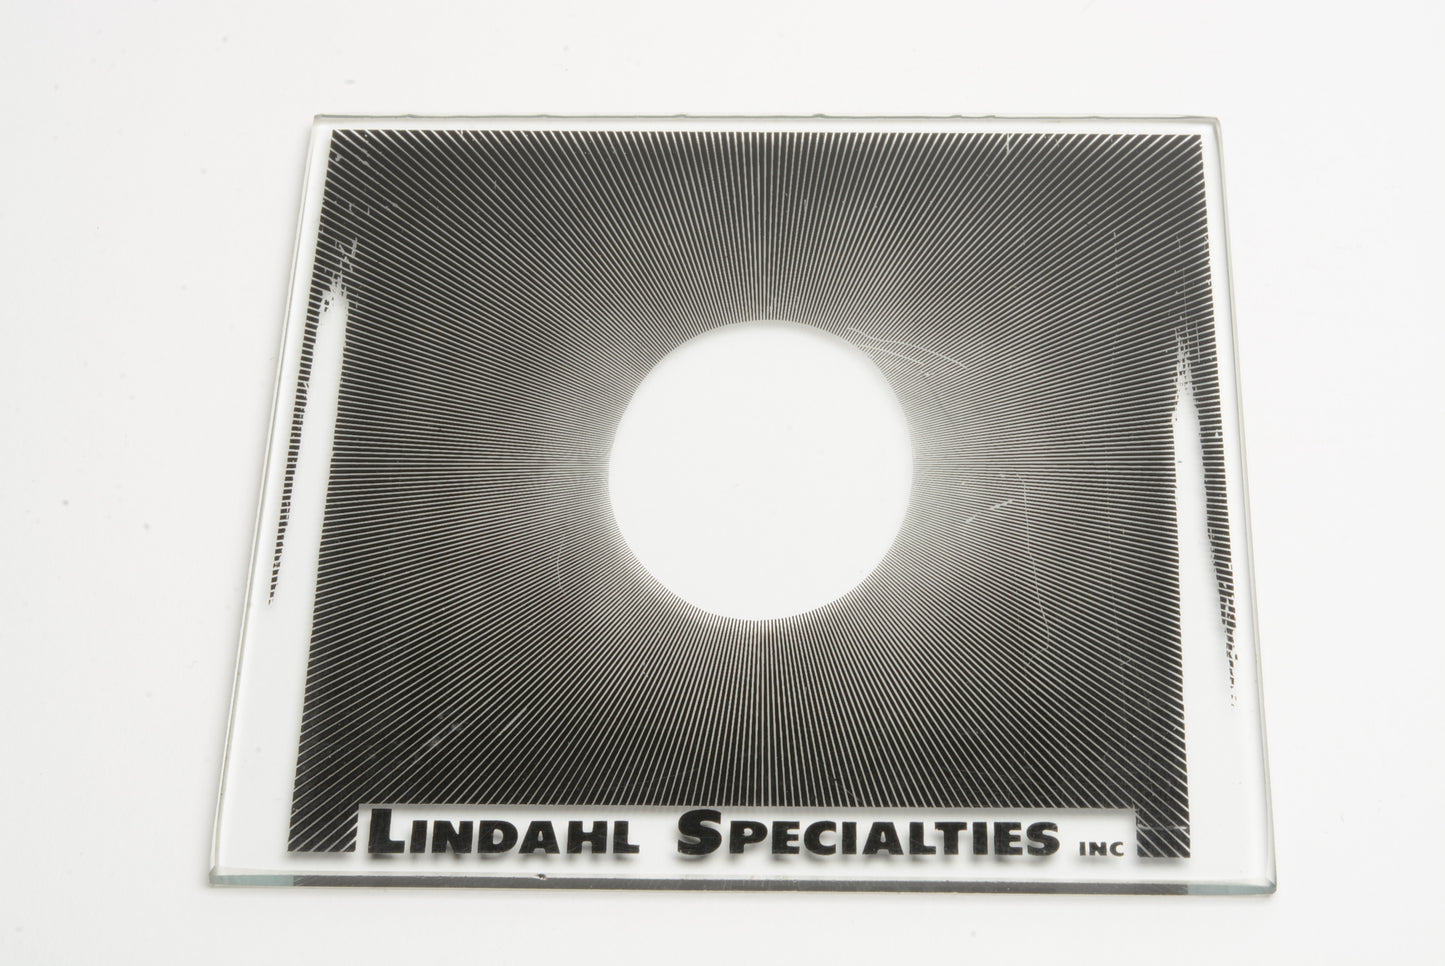 Lindahl Specialties set of 3 4.5" square glass effects filters